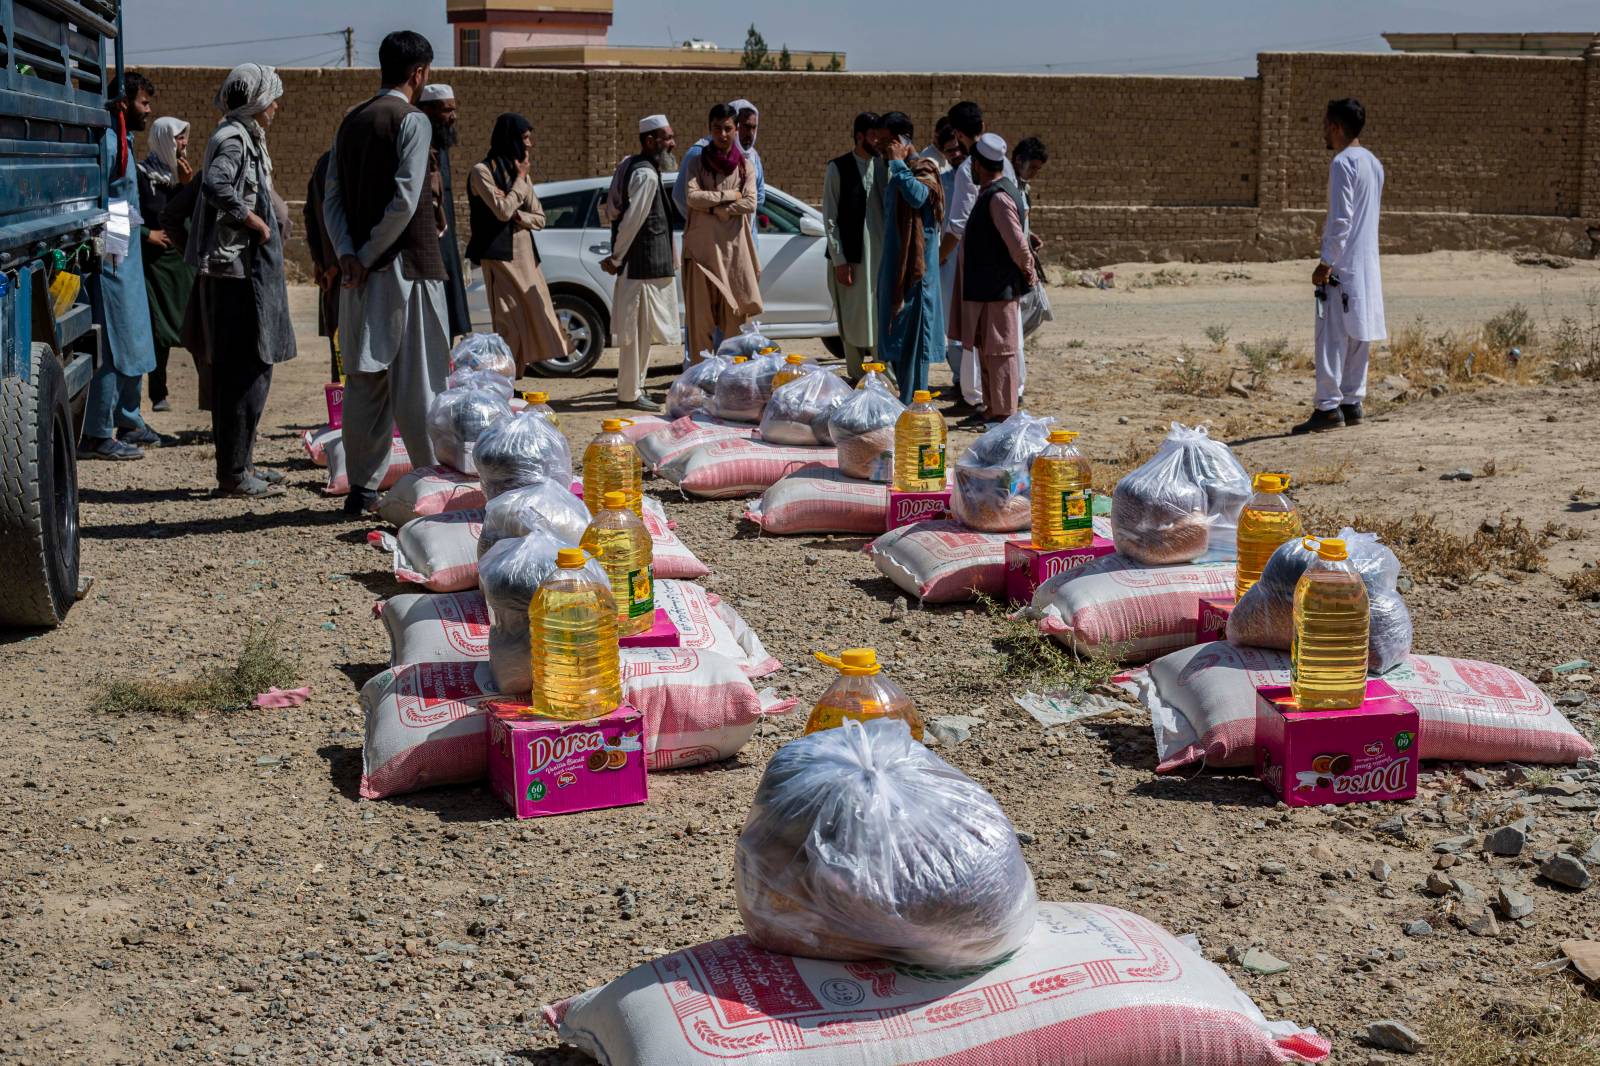 Aseel workers convene at Logar province, Afghanistan, for the distribution of food and medicines on Oct. 2, 2021 Courtesy Aseel